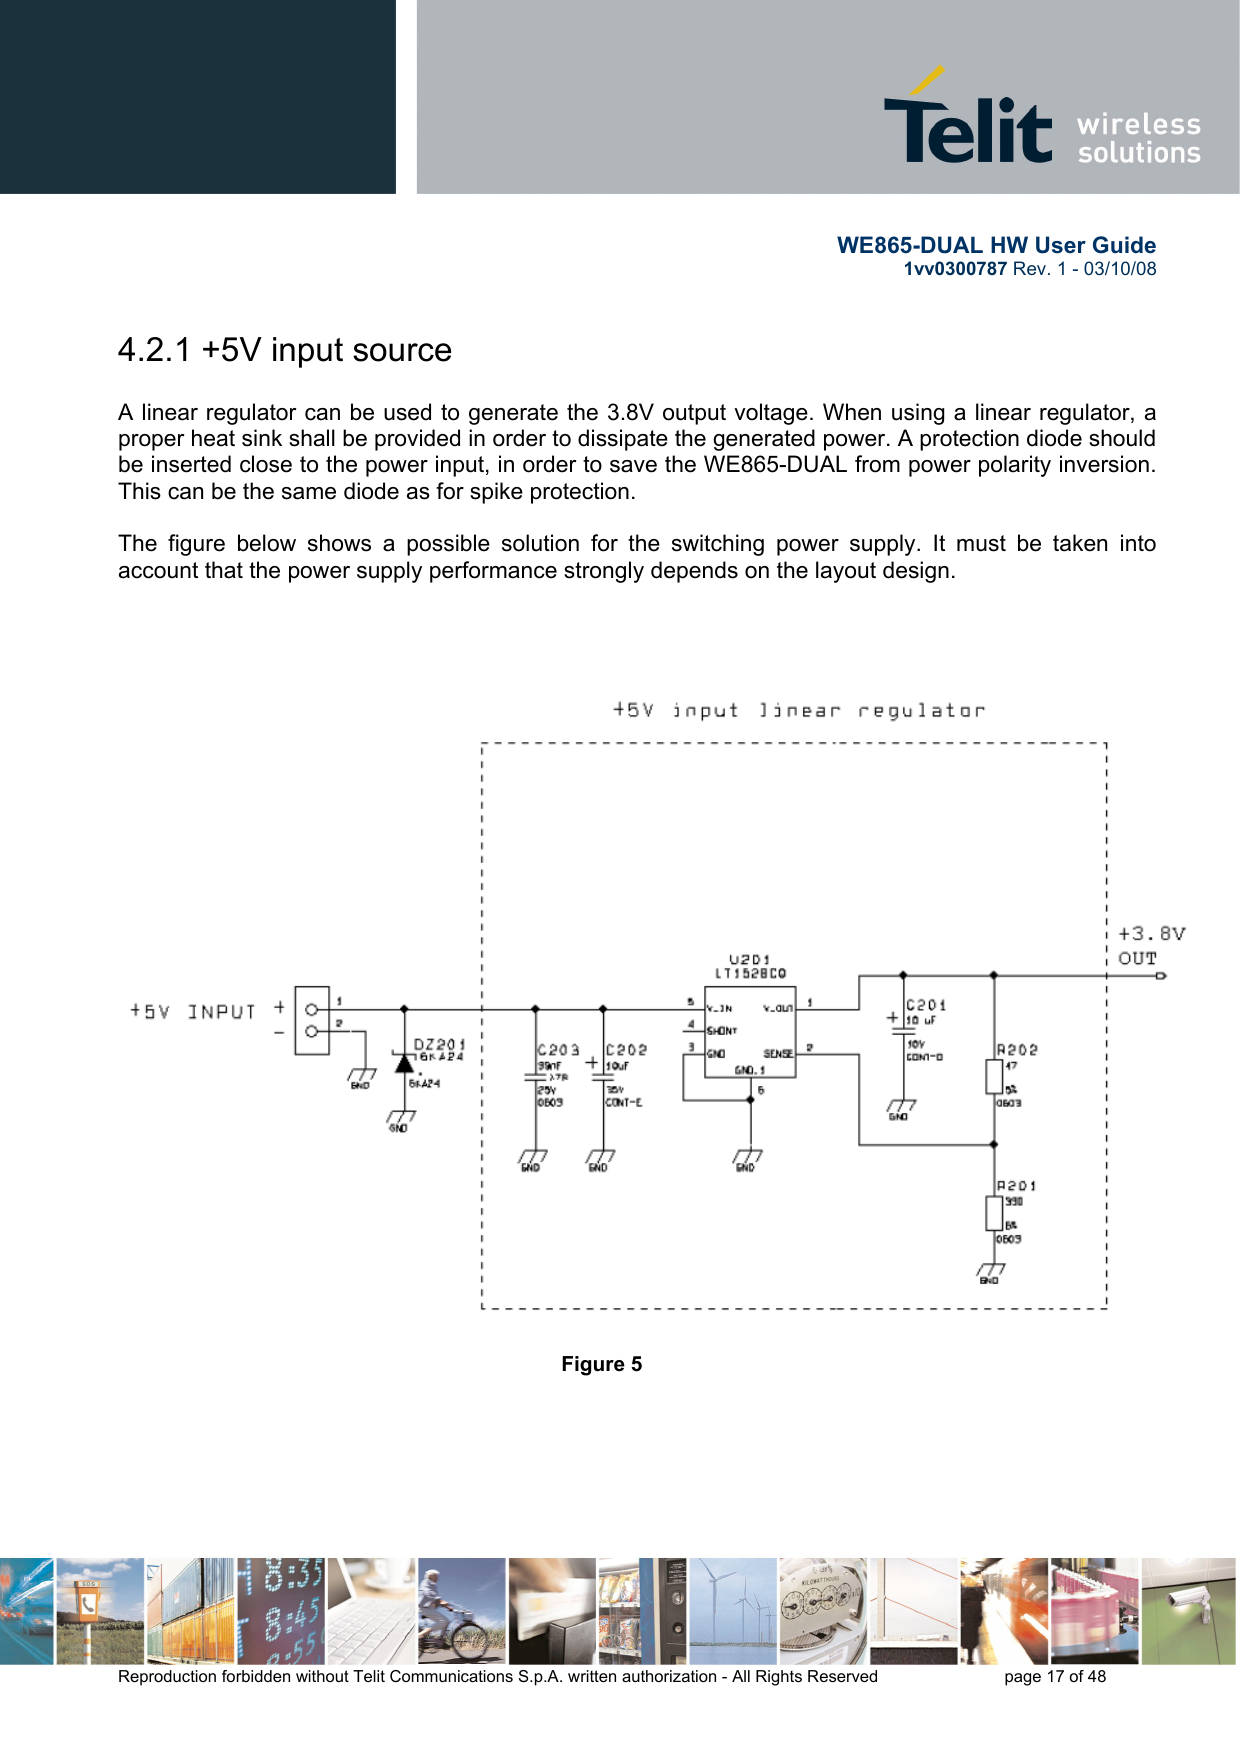       WE865-DUAL HW User Guide 1vv0300787 Rev. 1 - 03/10/08      Reproduction forbidden without Telit Communications S.p.A. written authorization - All Rights Reserved    page 17 of 48  4.2.1 +5V input source  A linear regulator can be used to generate the 3.8V output voltage. When using a linear regulator, a proper heat sink shall be provided in order to dissipate the generated power. A protection diode should be inserted close to the power input, in order to save the WE865-DUAL from power polarity inversion. This can be the same diode as for spike protection.  The figure below shows a possible solution for the switching power supply. It must be taken into account that the power supply performance strongly depends on the layout design.     Figure 5    